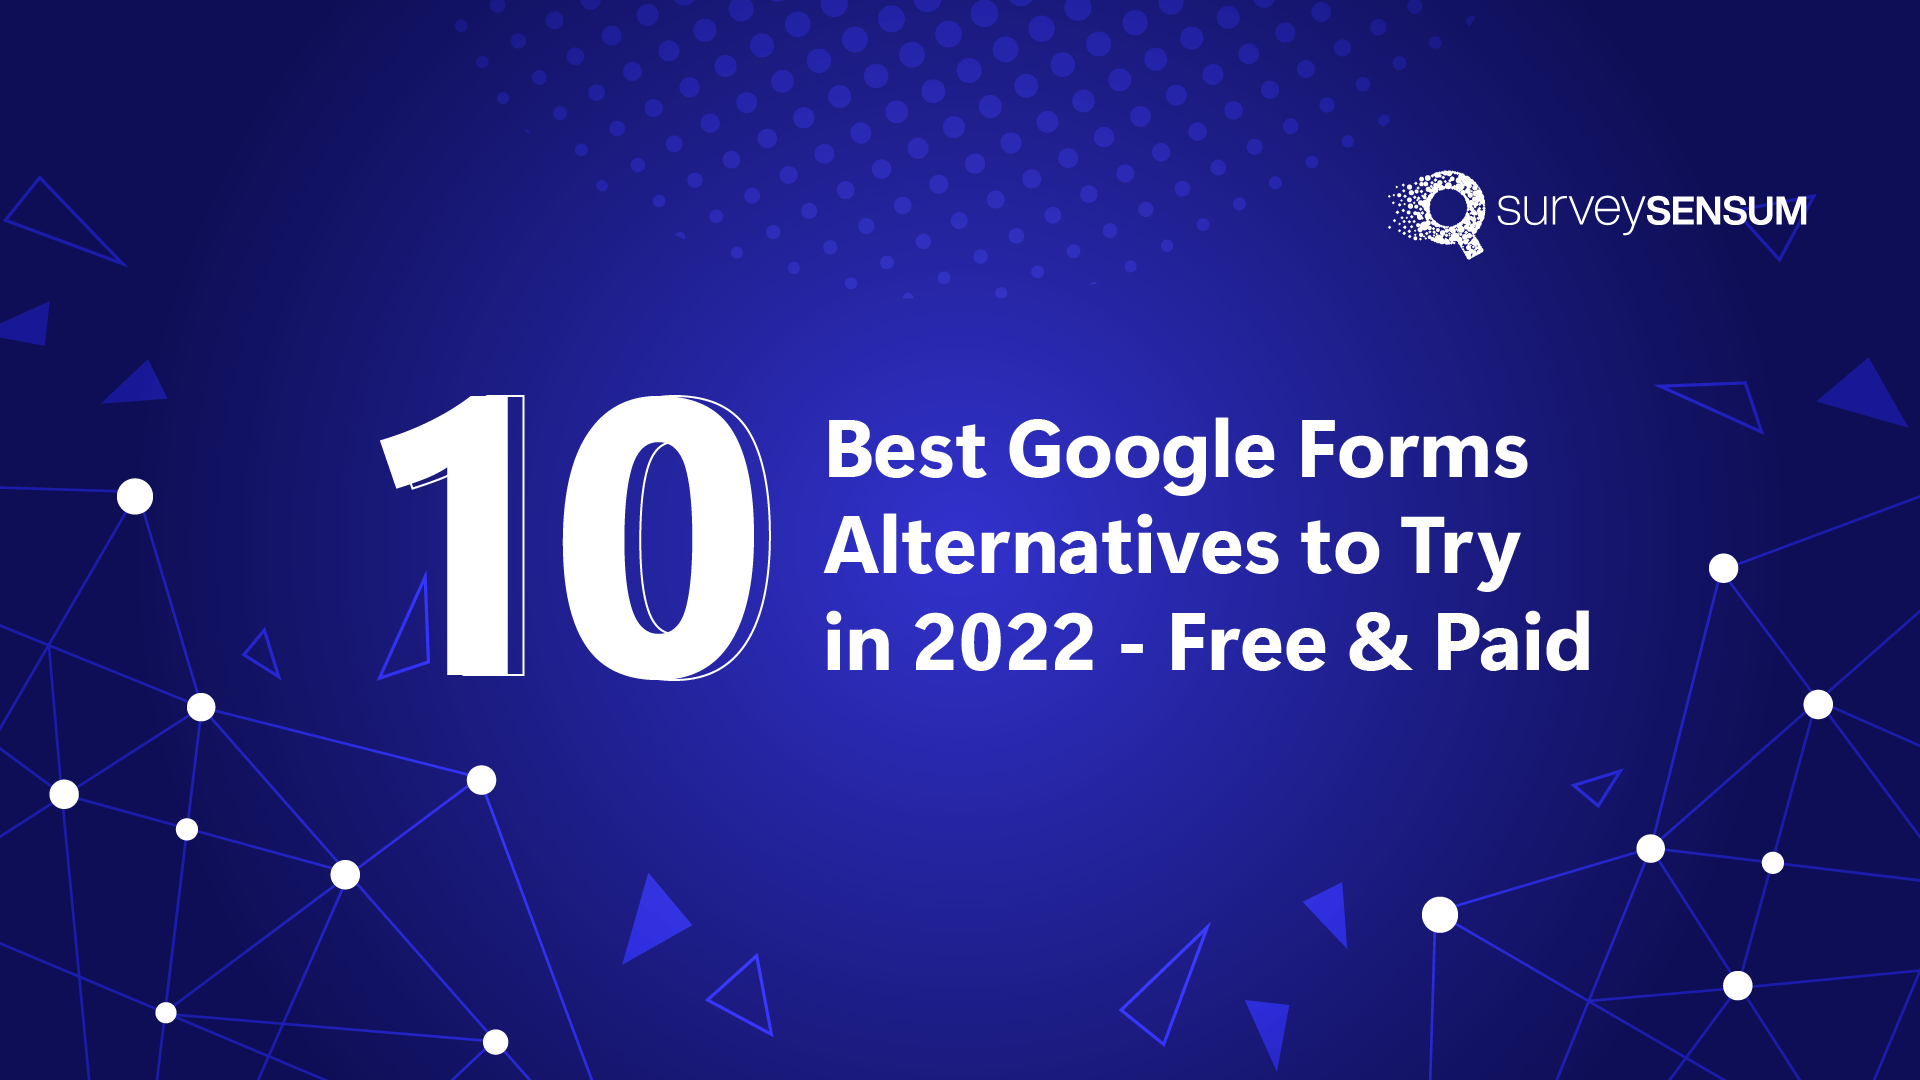 10 best Google Form alternatives to try in 2022 - Free & Paid